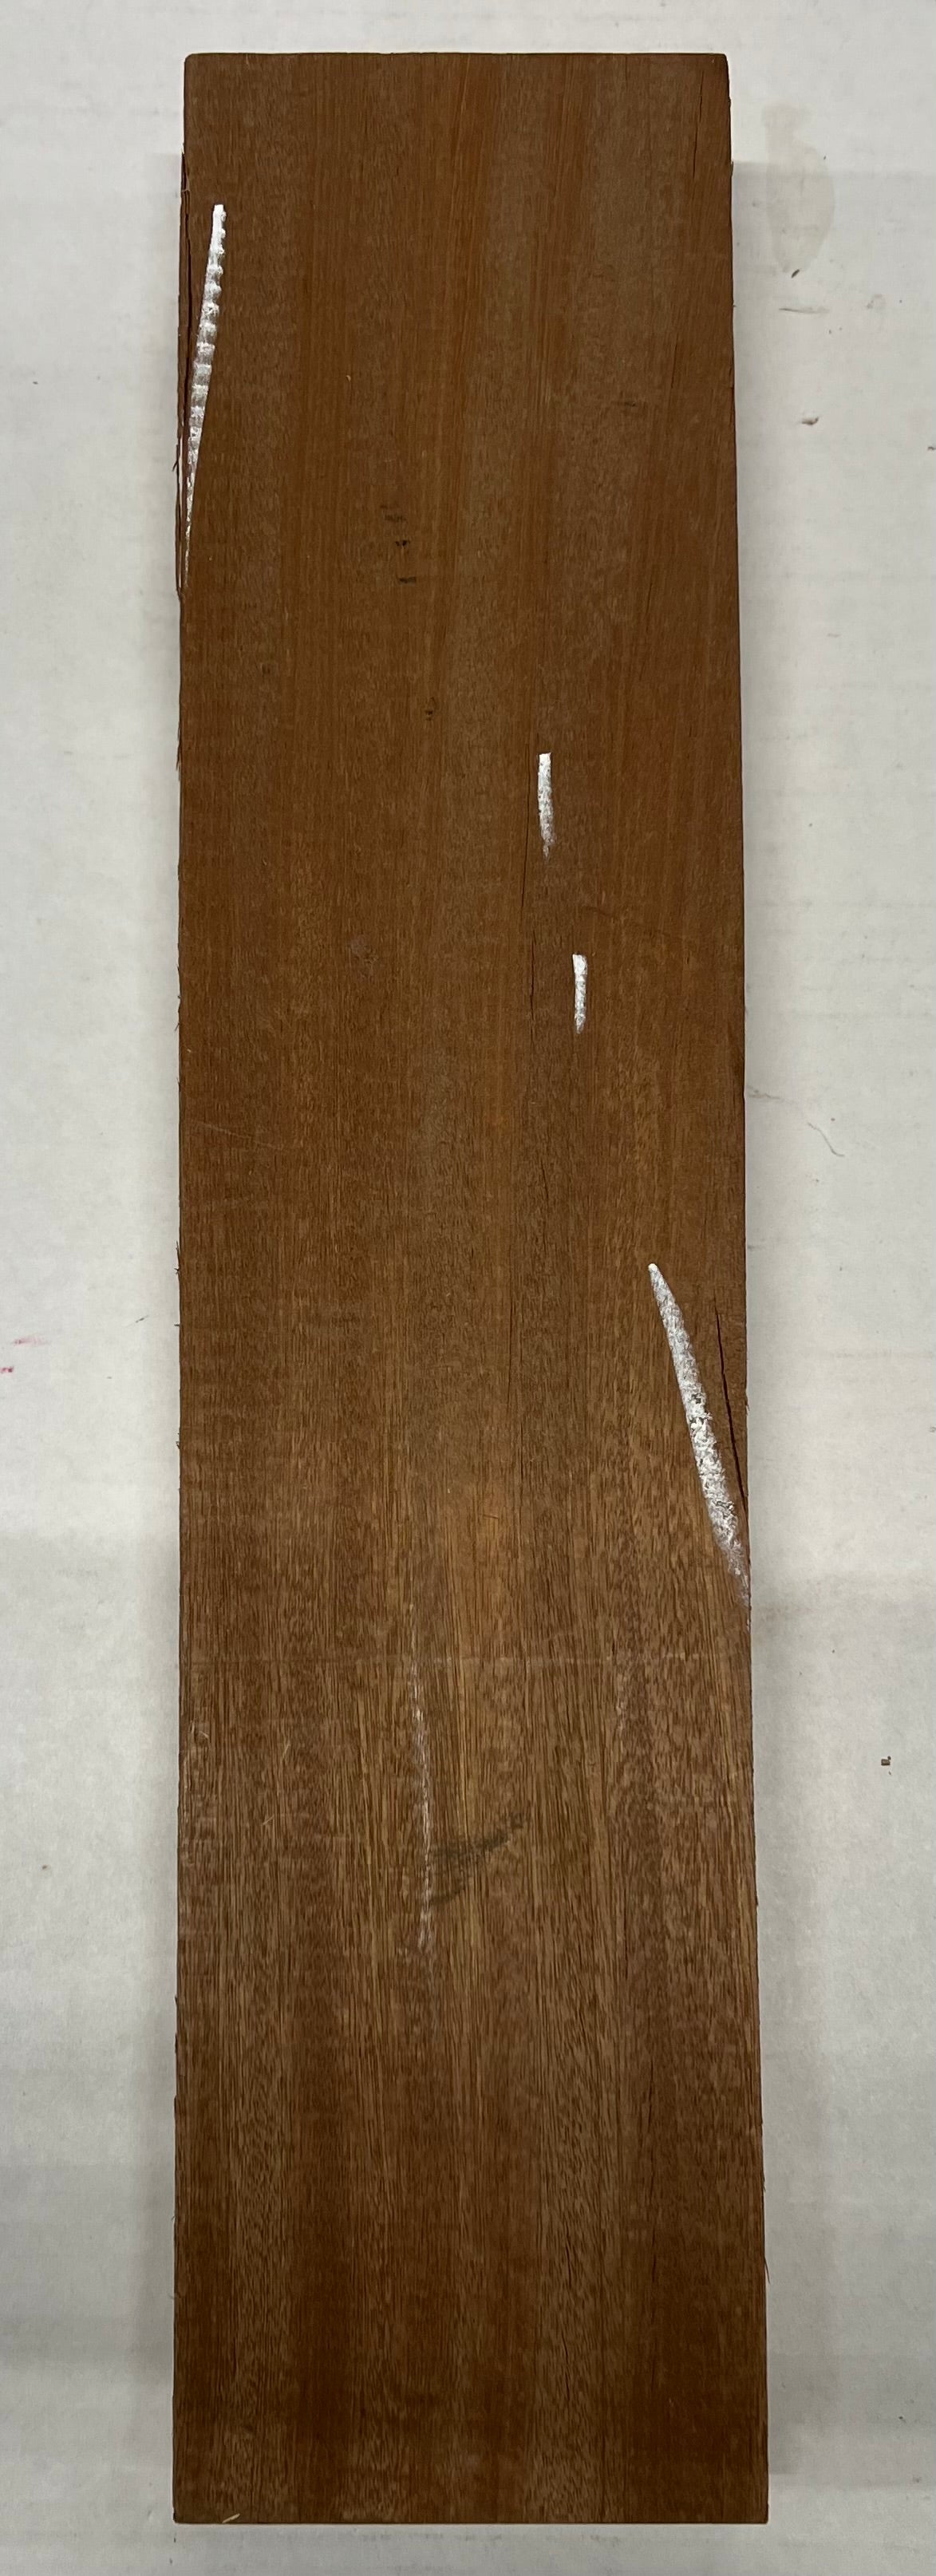 Sapele Lumber Board Square Wood Blank 21&quot;x4-3/4&quot;x1-3/4&quot;  